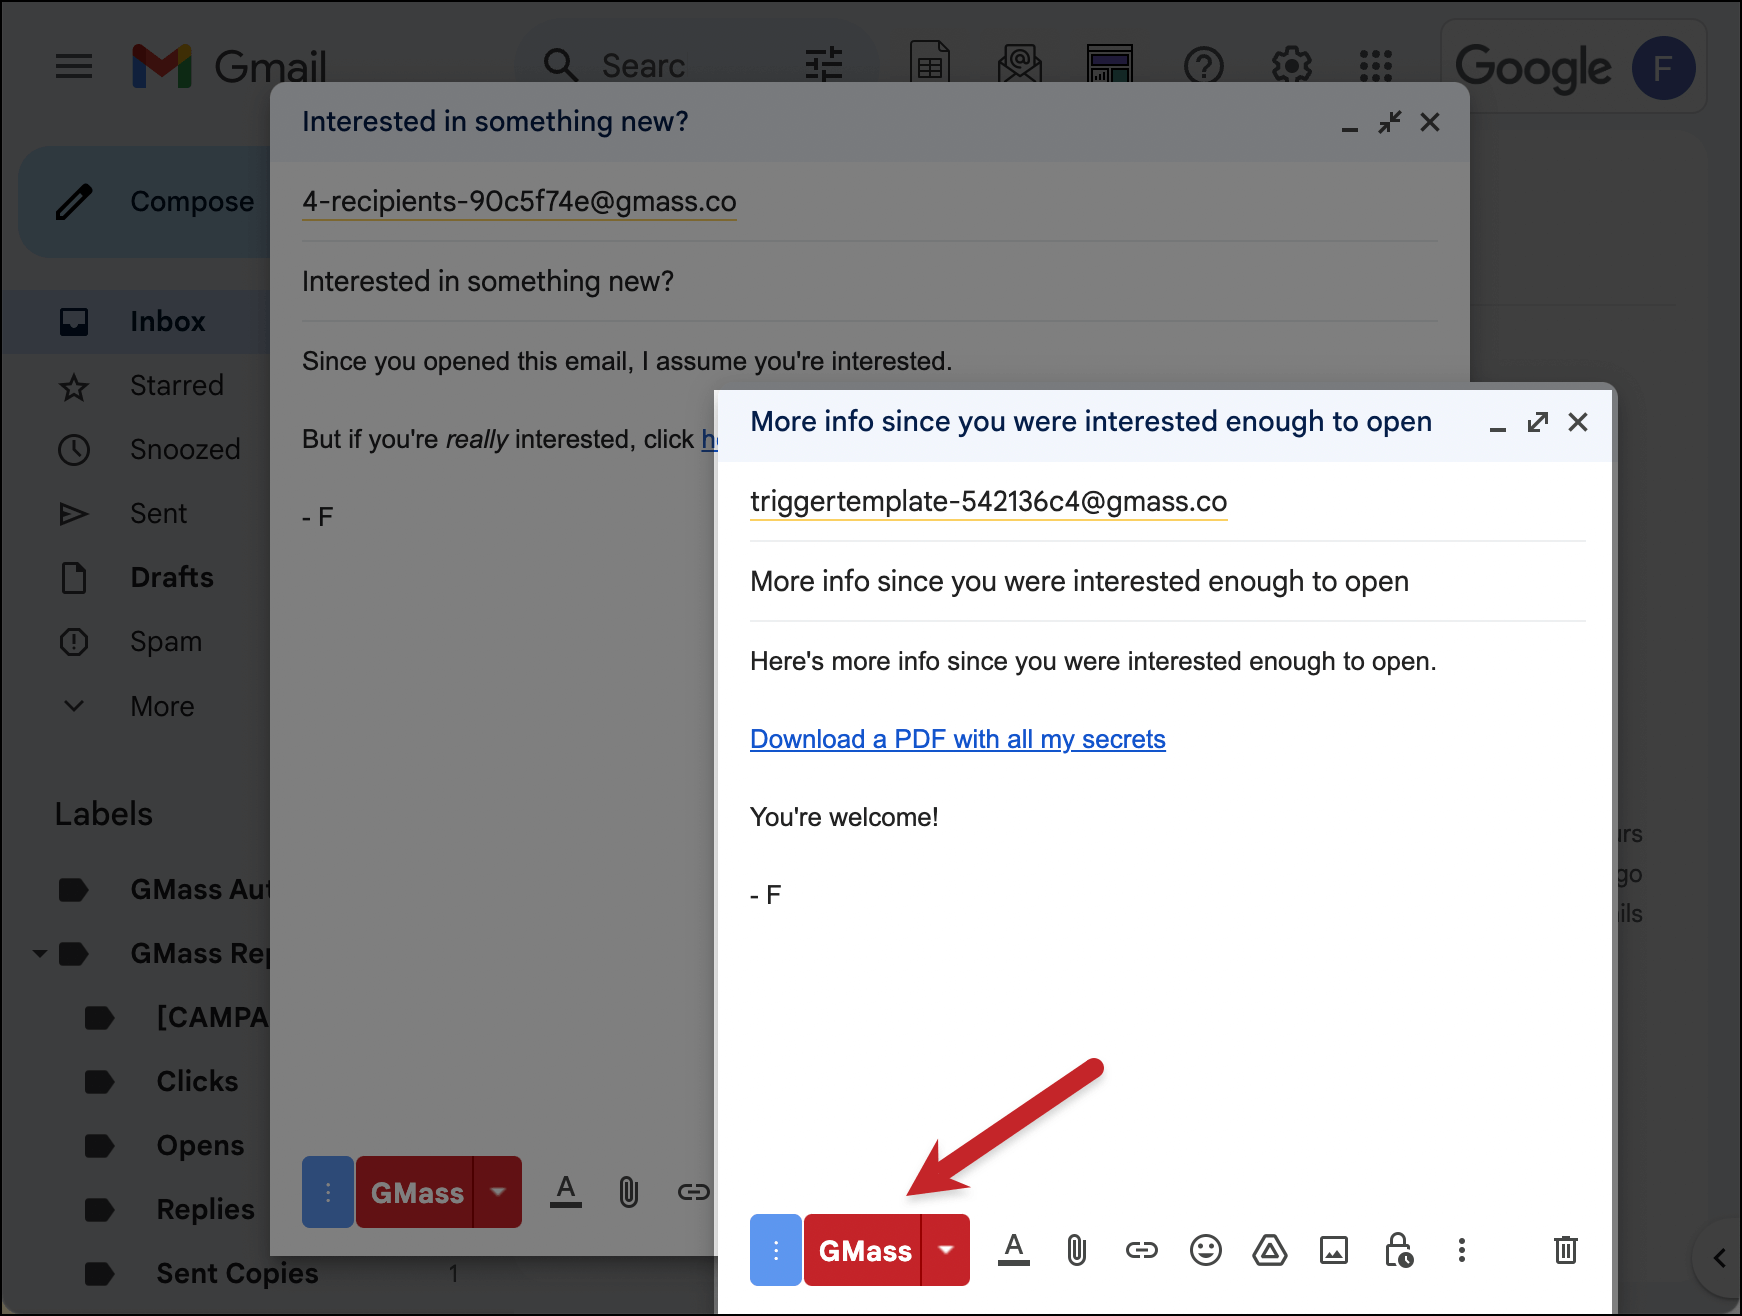 Save the triggered email template using the GMass button